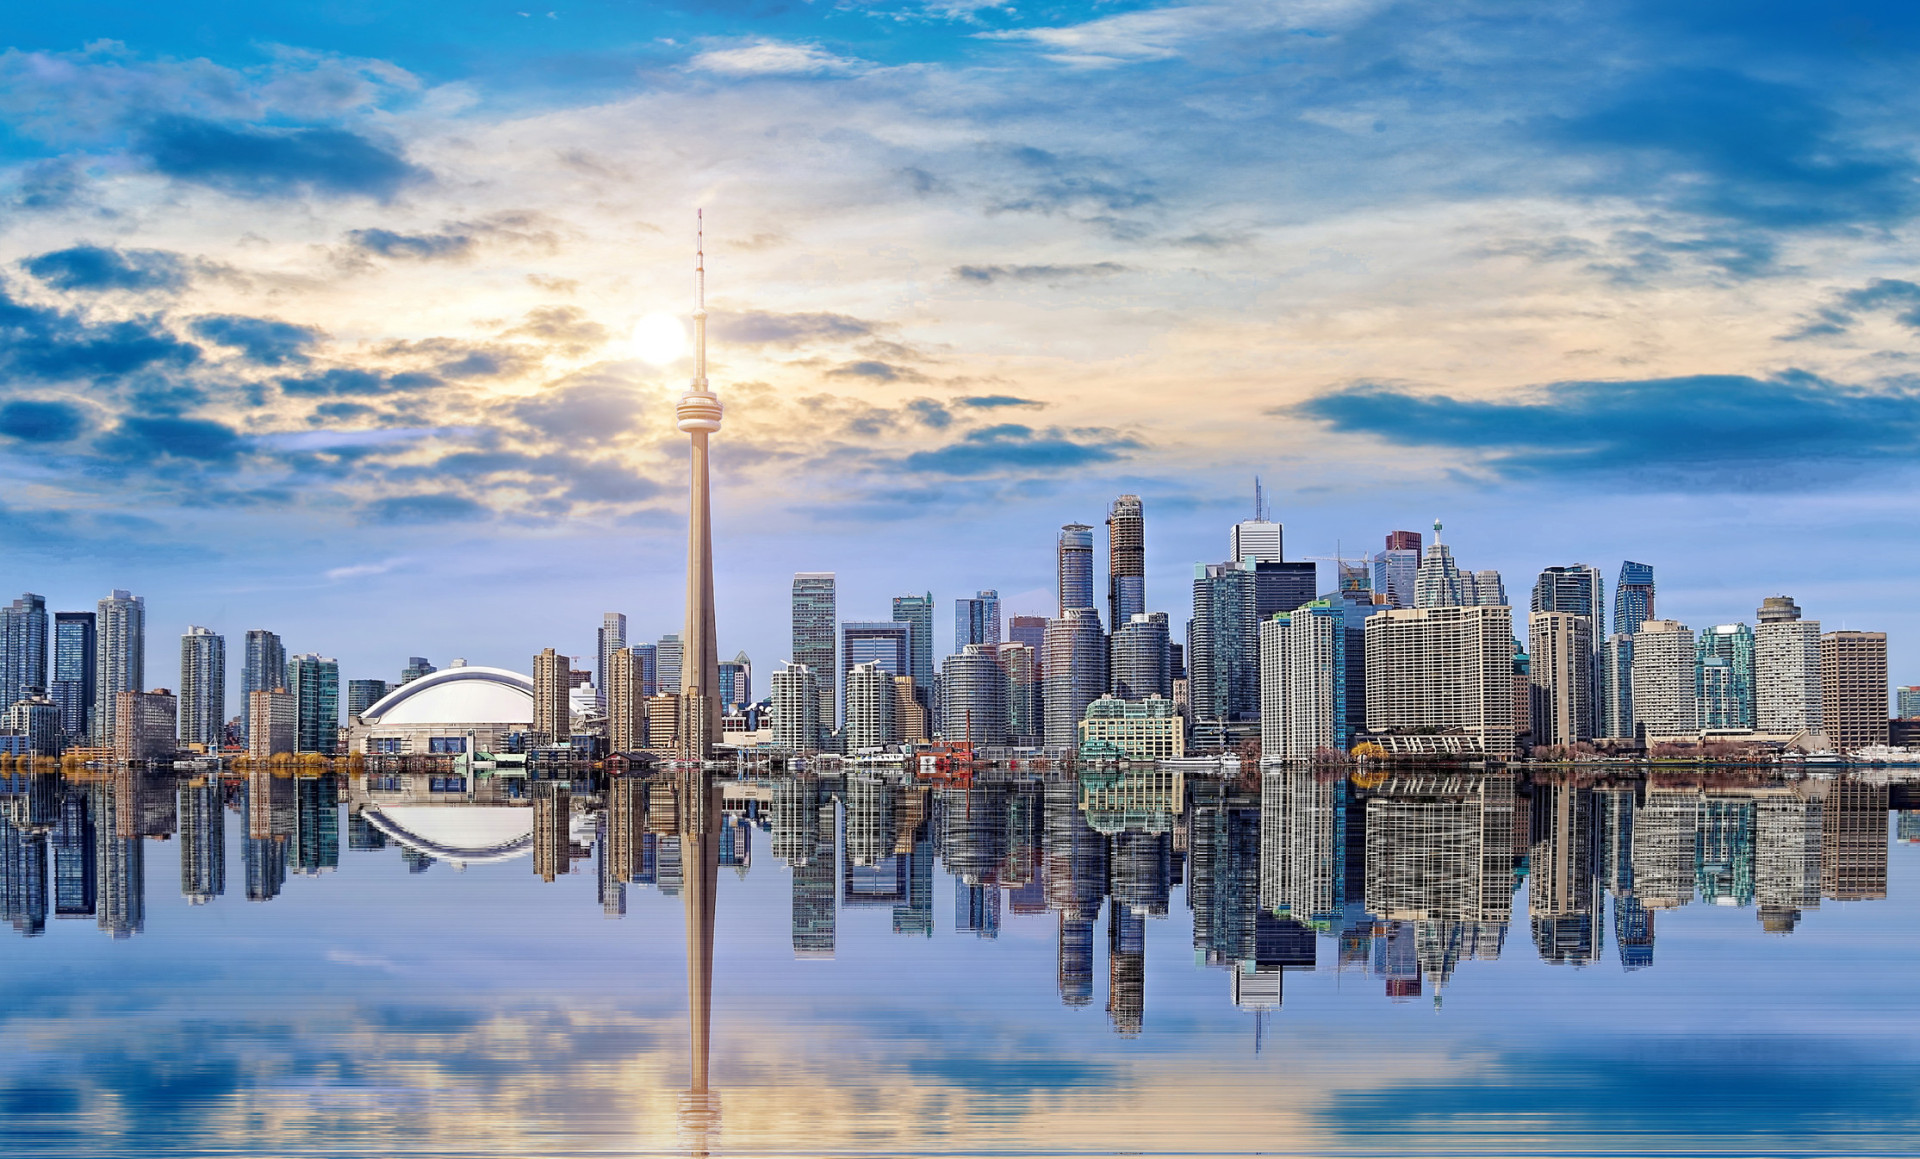 Toronto's network of transports is fairly easy to go around, and you can also explore the downtown area on foot. Highlights include the CN Tower, Yonge-Dundas Square, and High Park.<p><a href="https://www.msn.com/en-us/community/channel/vid-7xx8mnucu55yw63we9va2gwr7uihbxwc68fxqp25x6tg4ftibpra?cvid=94631541bc0f4f89bfd59158d696ad7e">Follow us and access great exclusive content every day</a></p>